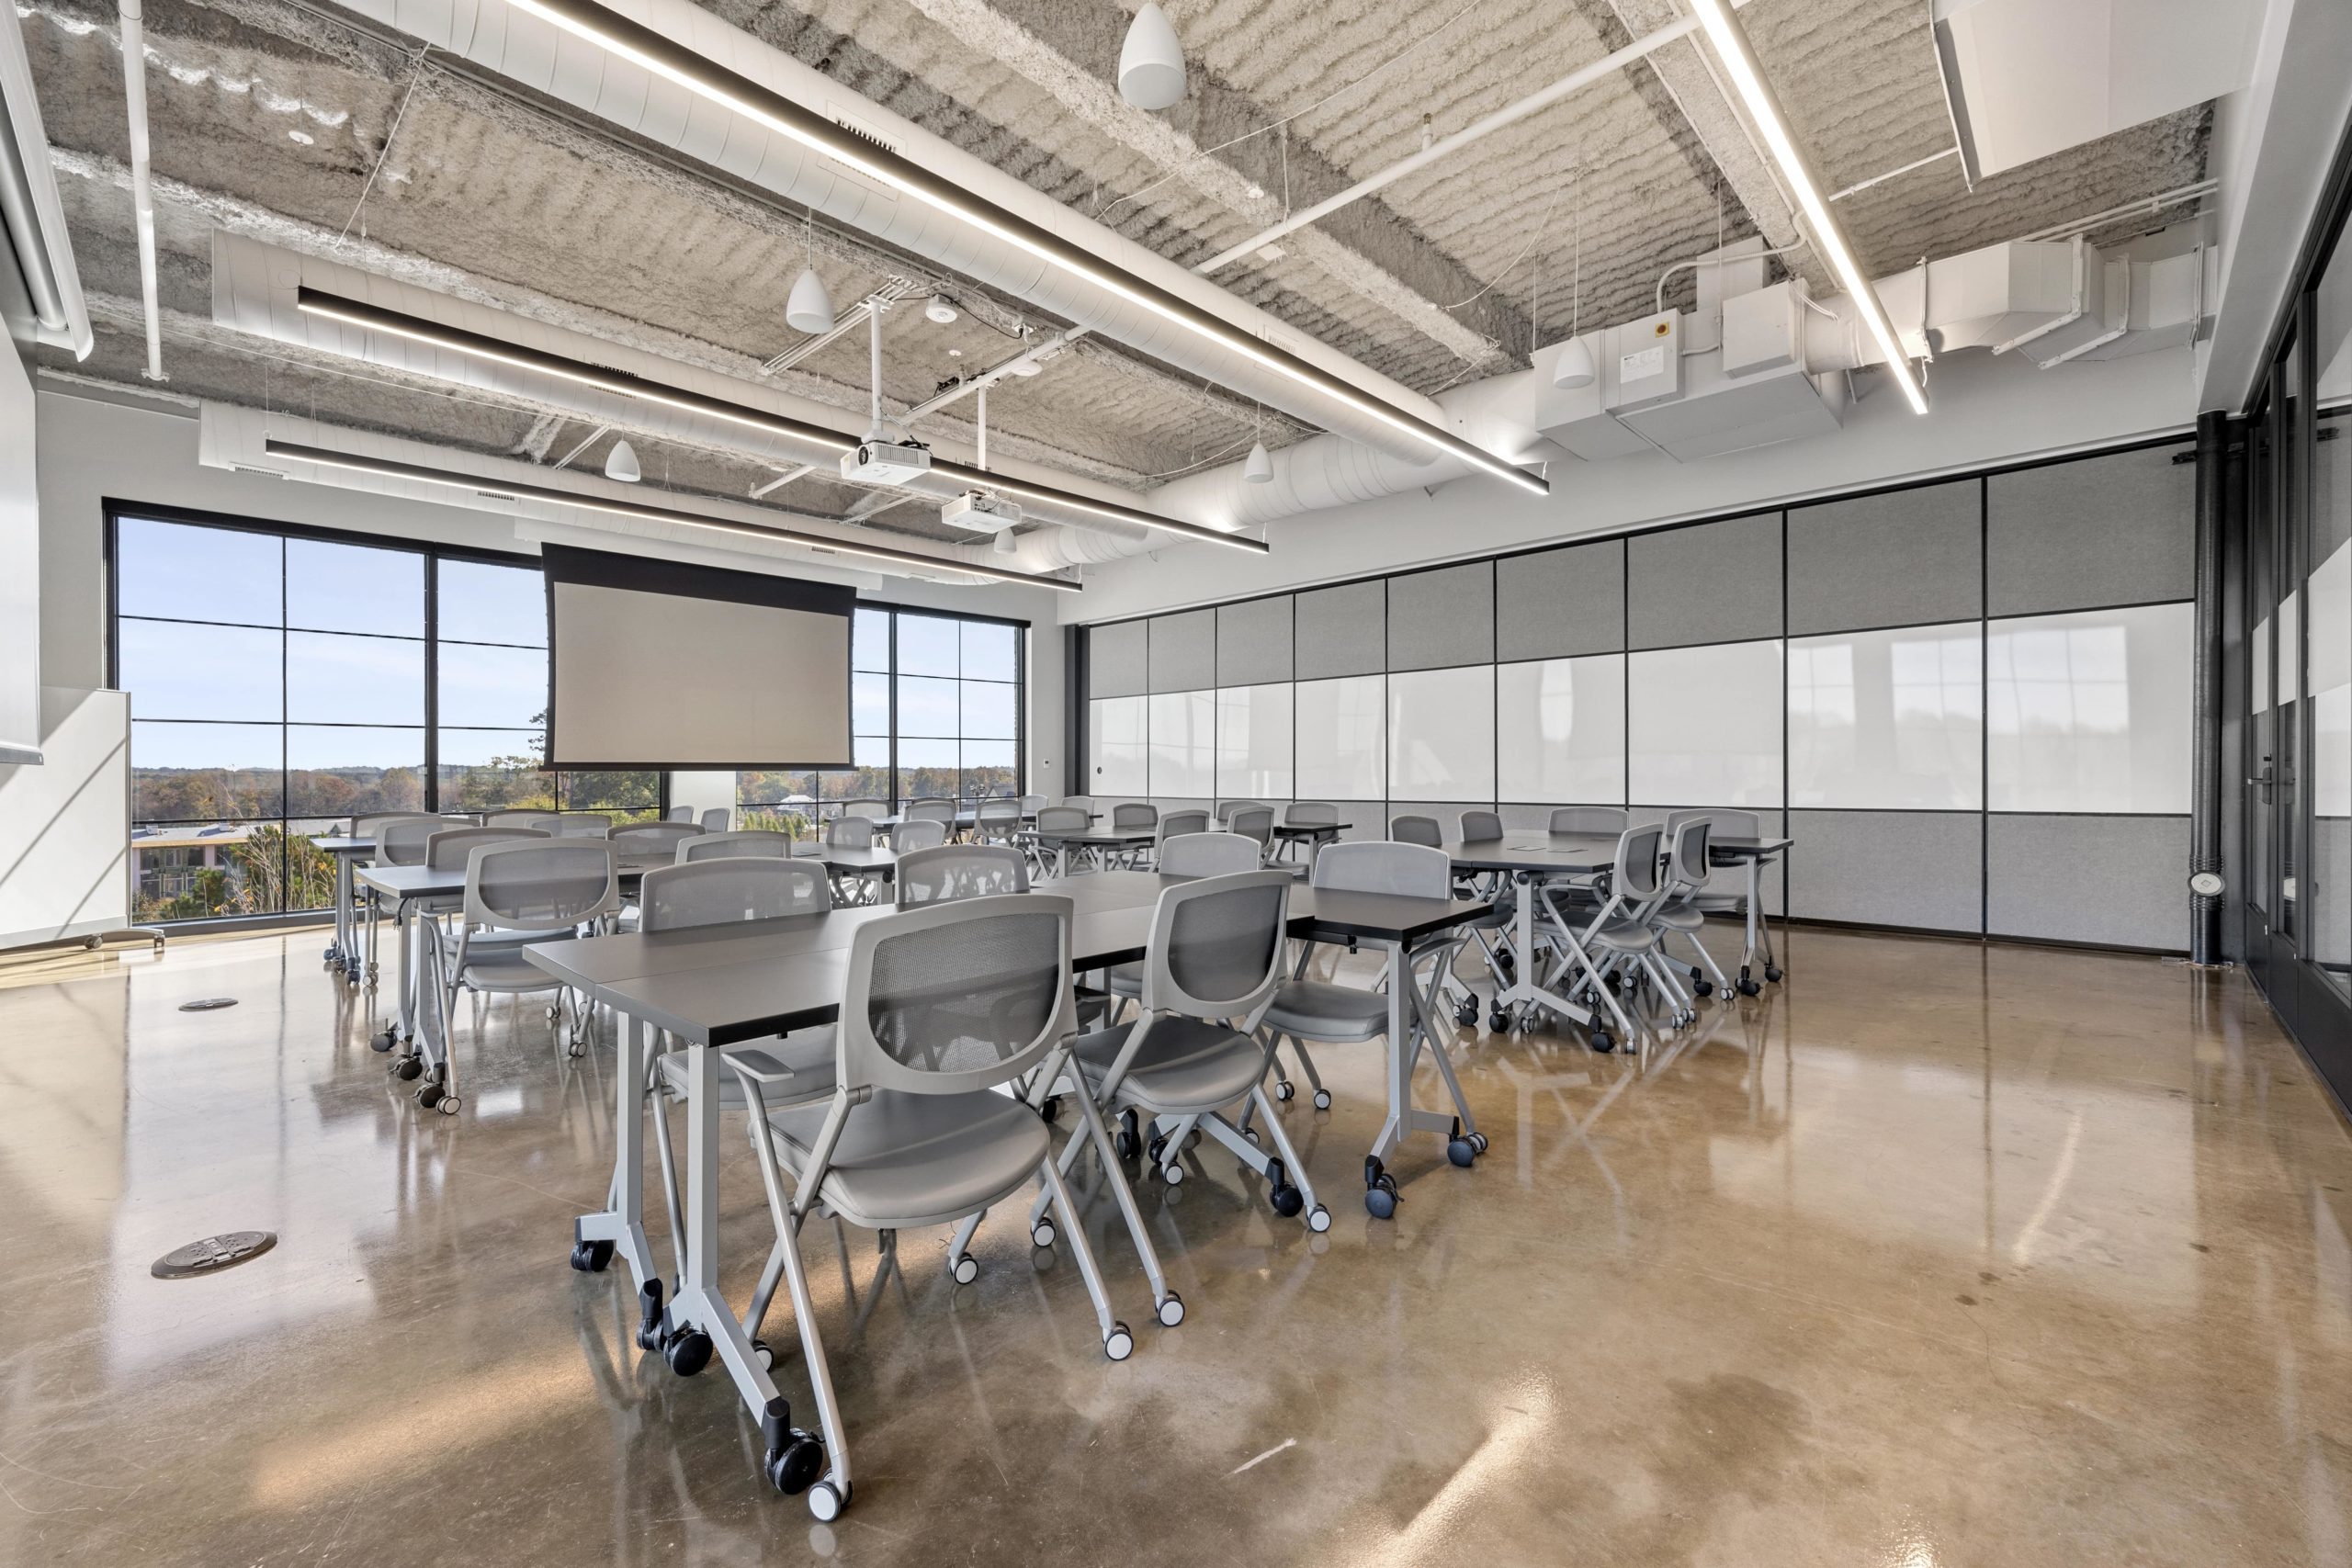 Meeting room seats up to 40 people and features a large exterior window